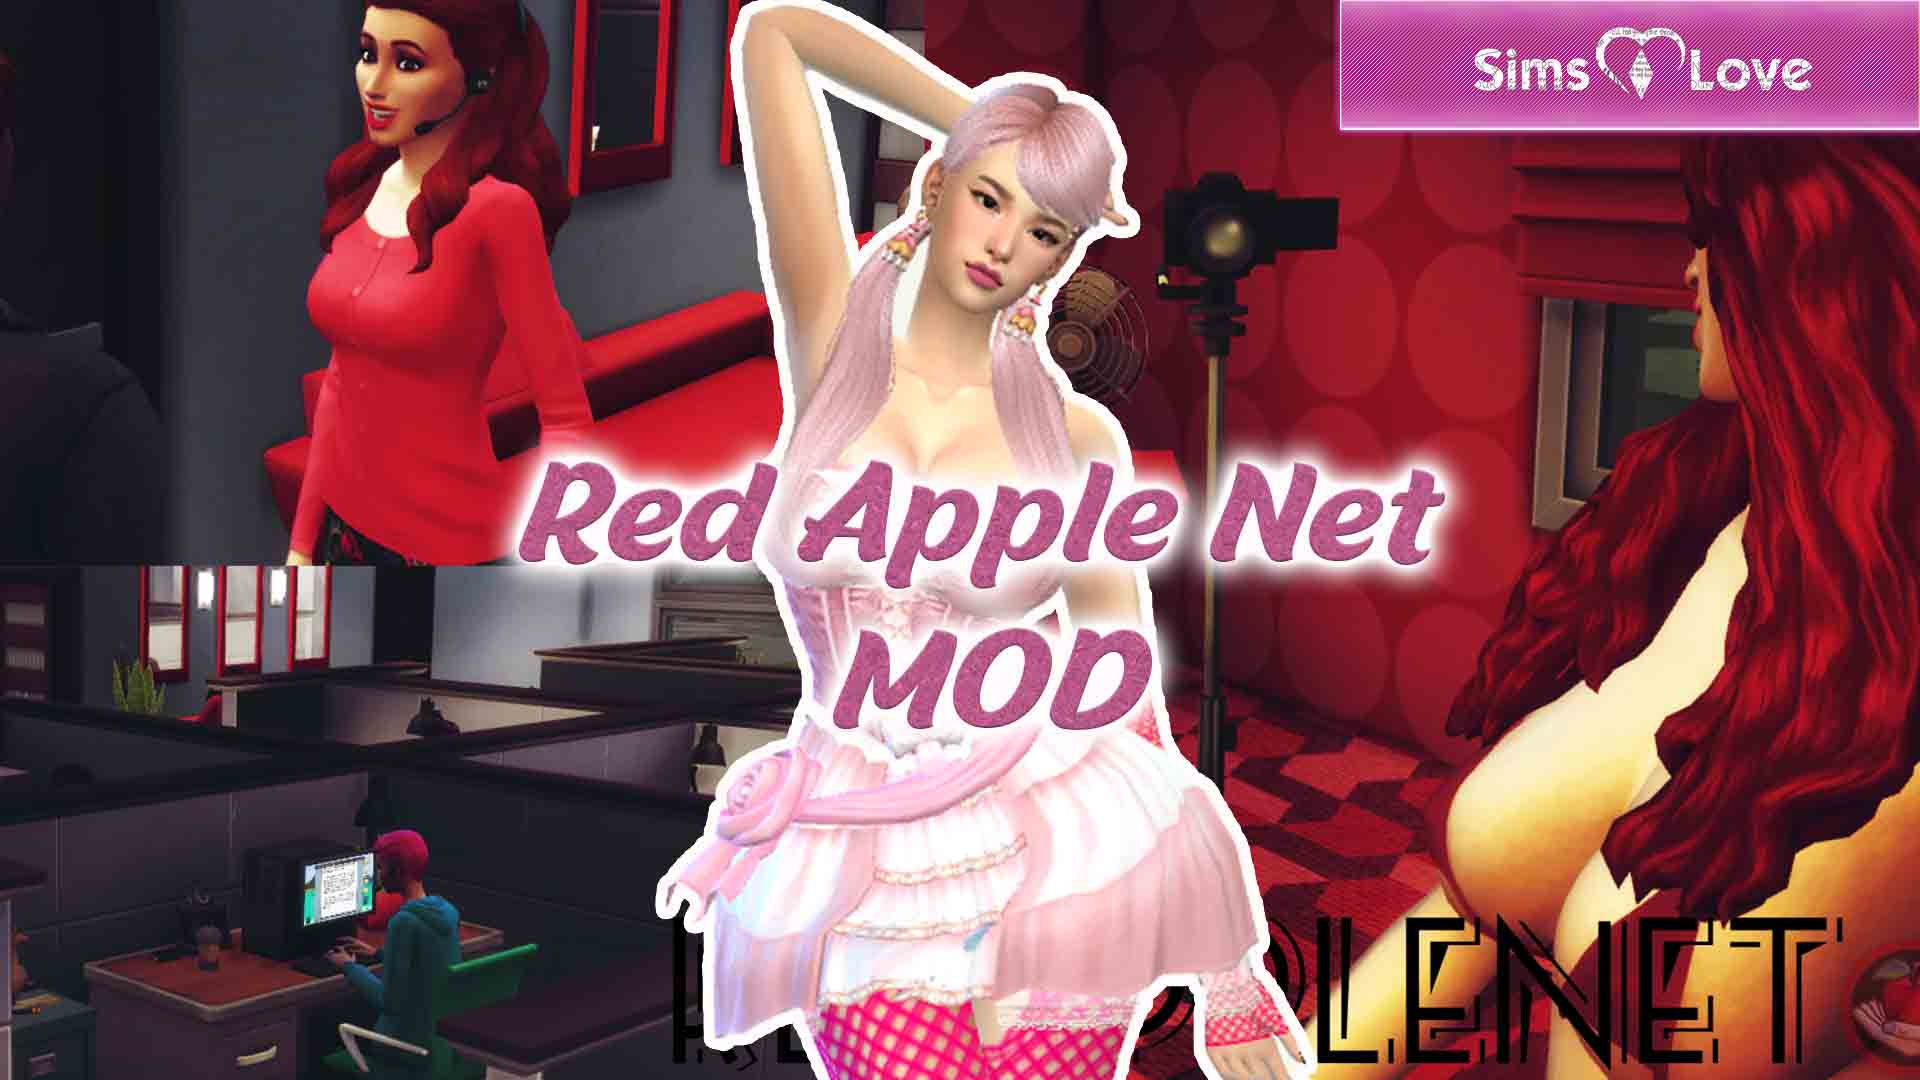 sims 4 mod download on mac